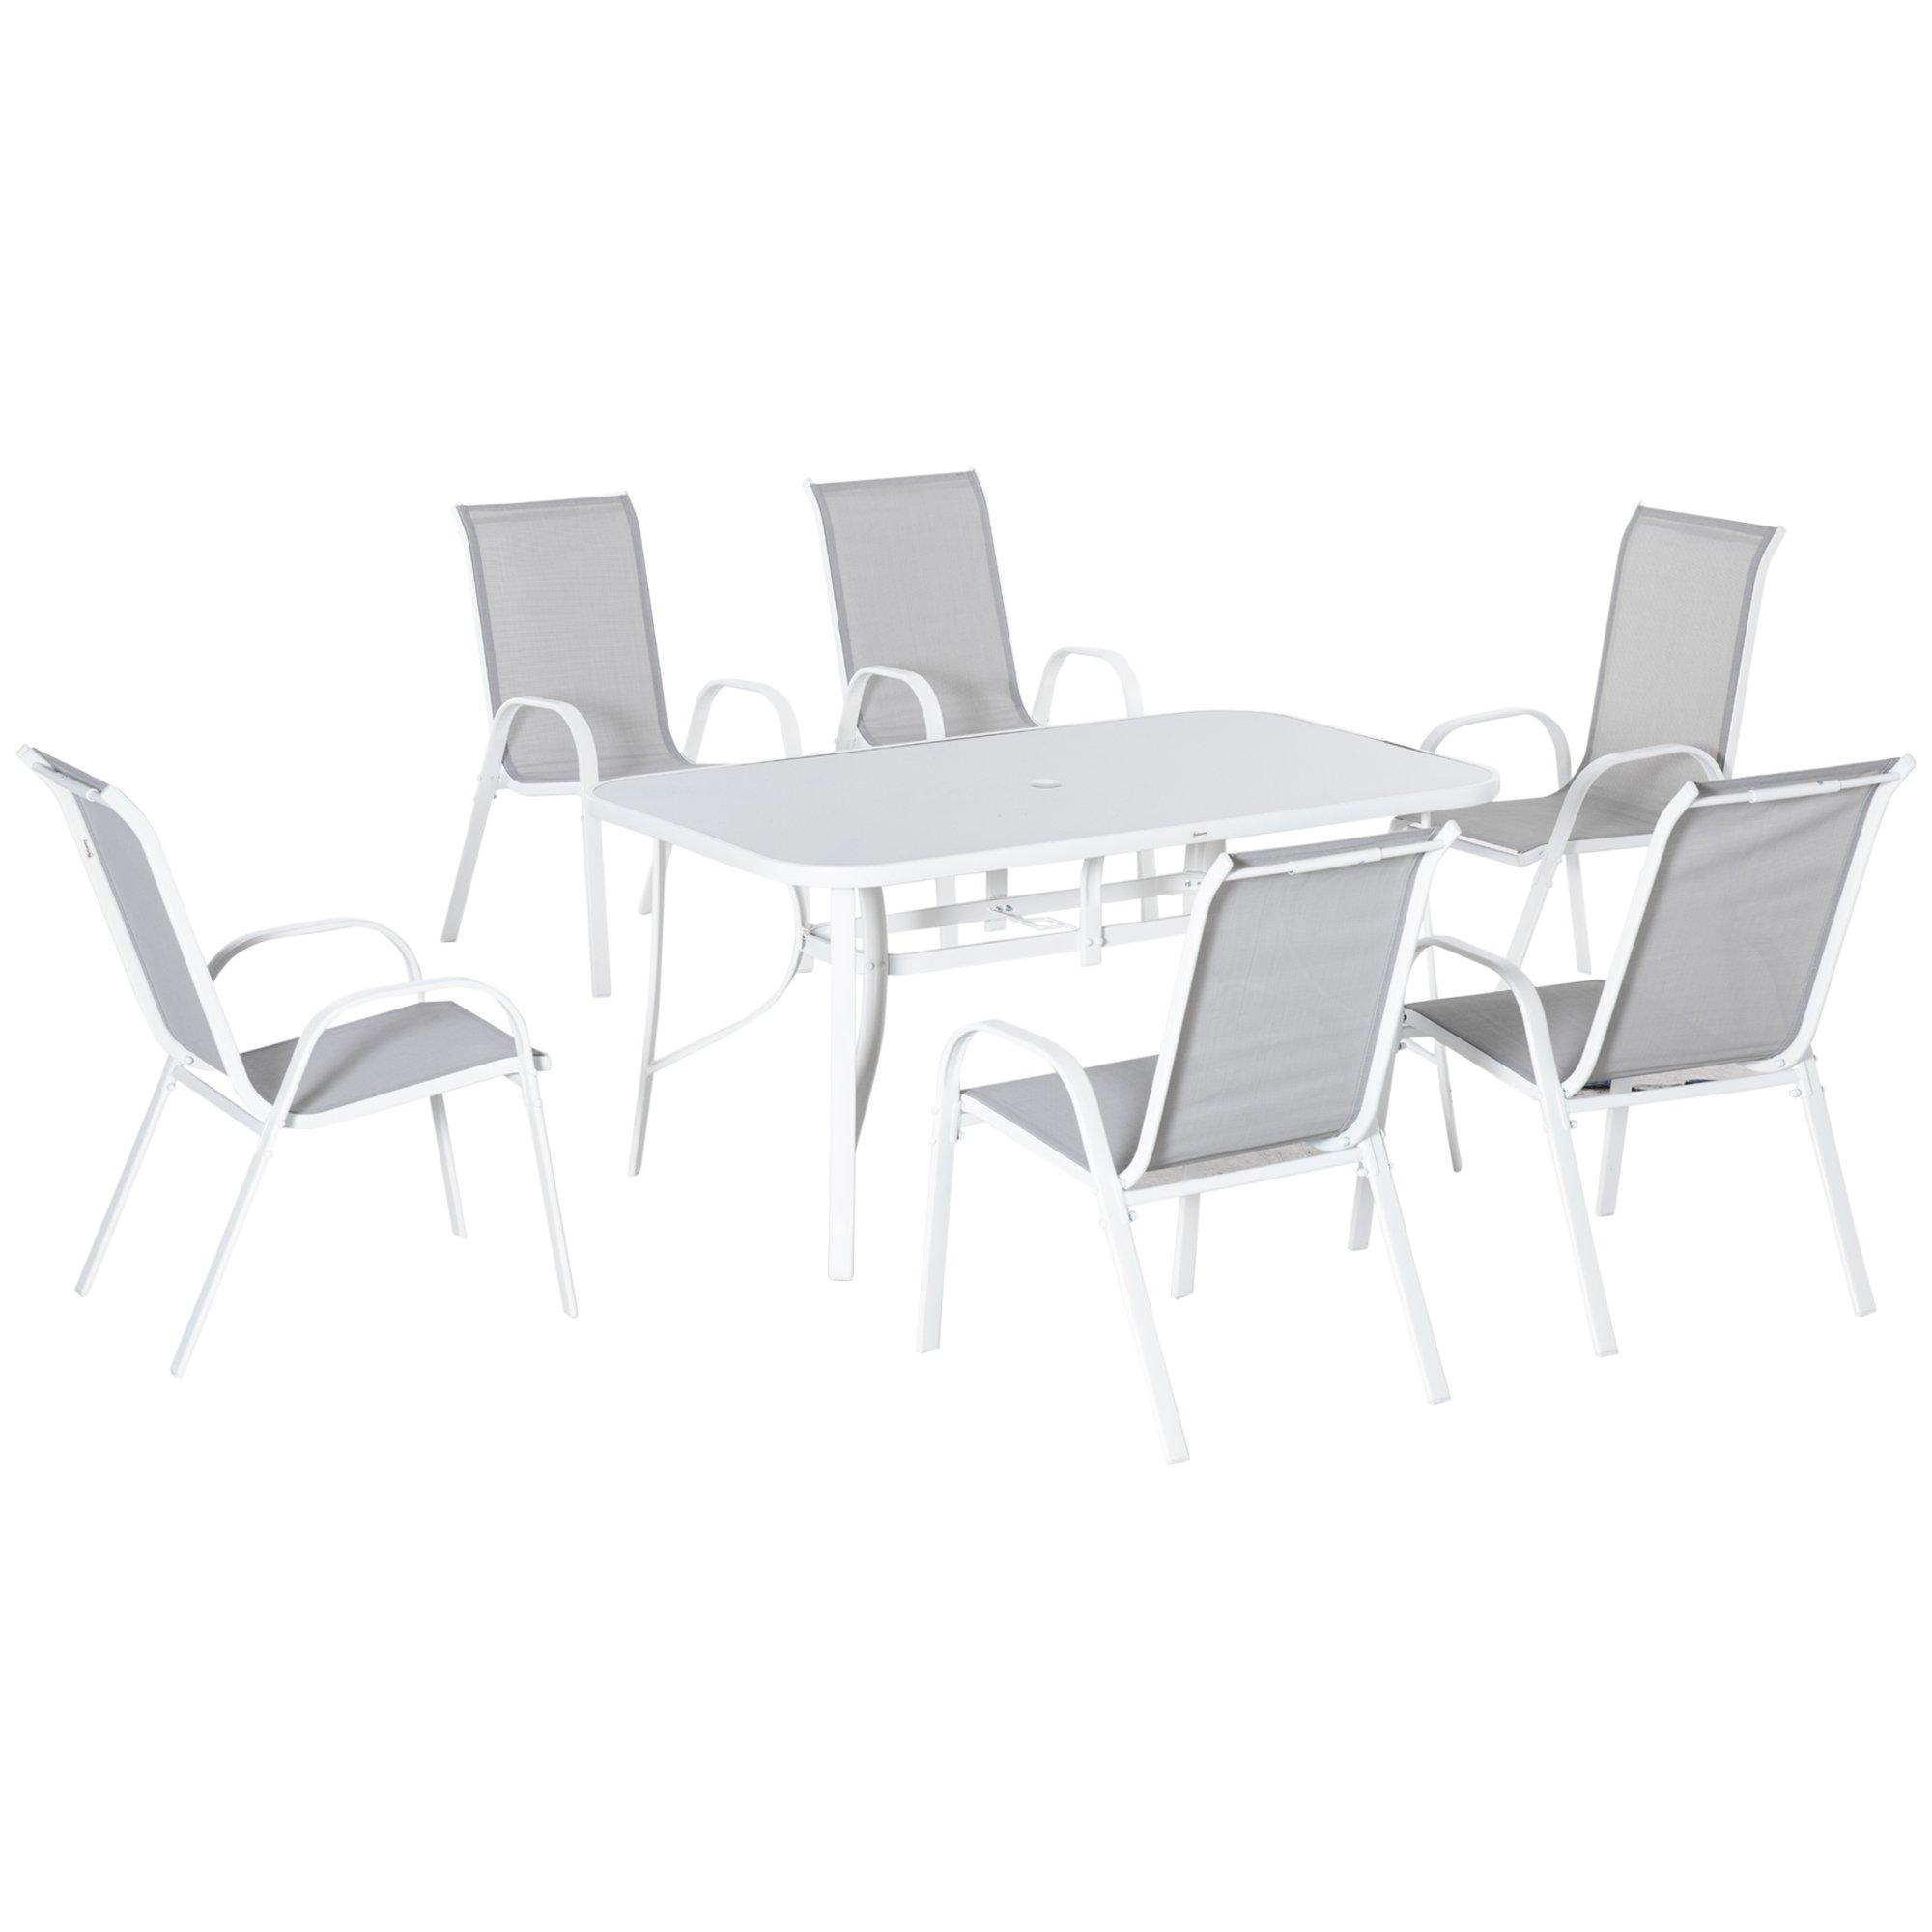 7 Piece Garden Dining Set with Dining Table and Chairs for Backyard